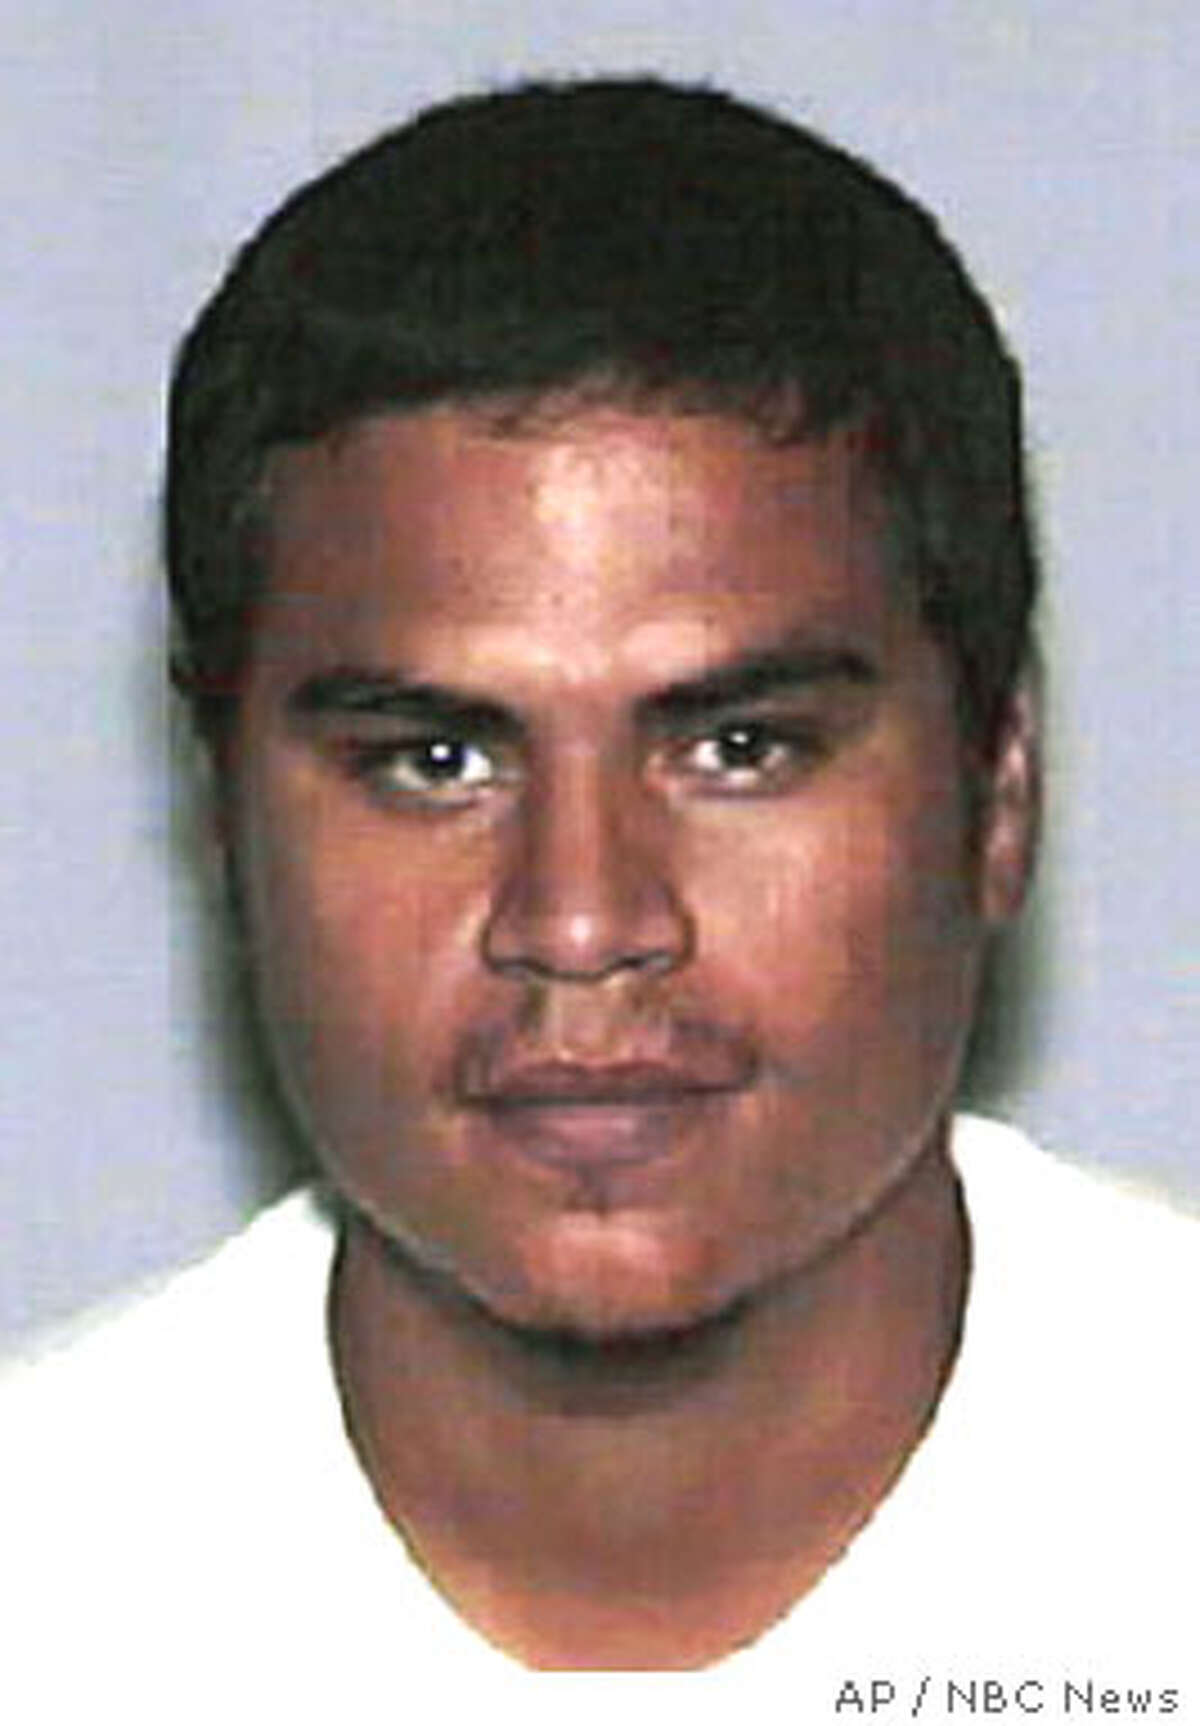 Jose Padilla, also known as Abdullah al Muhajir, who was arrested in an alleged plot to spread radioactive material across parts of America, is shown in this undated photo. Traveling from Pakistan via Zurich to Chicago's O'Hare International Airport, he was under continuous surveillance by U.S. agents on those flights, and the FBI was waiting to arrest him May 8 as his plane arrived at the gate. (AP Photo/NBC News)